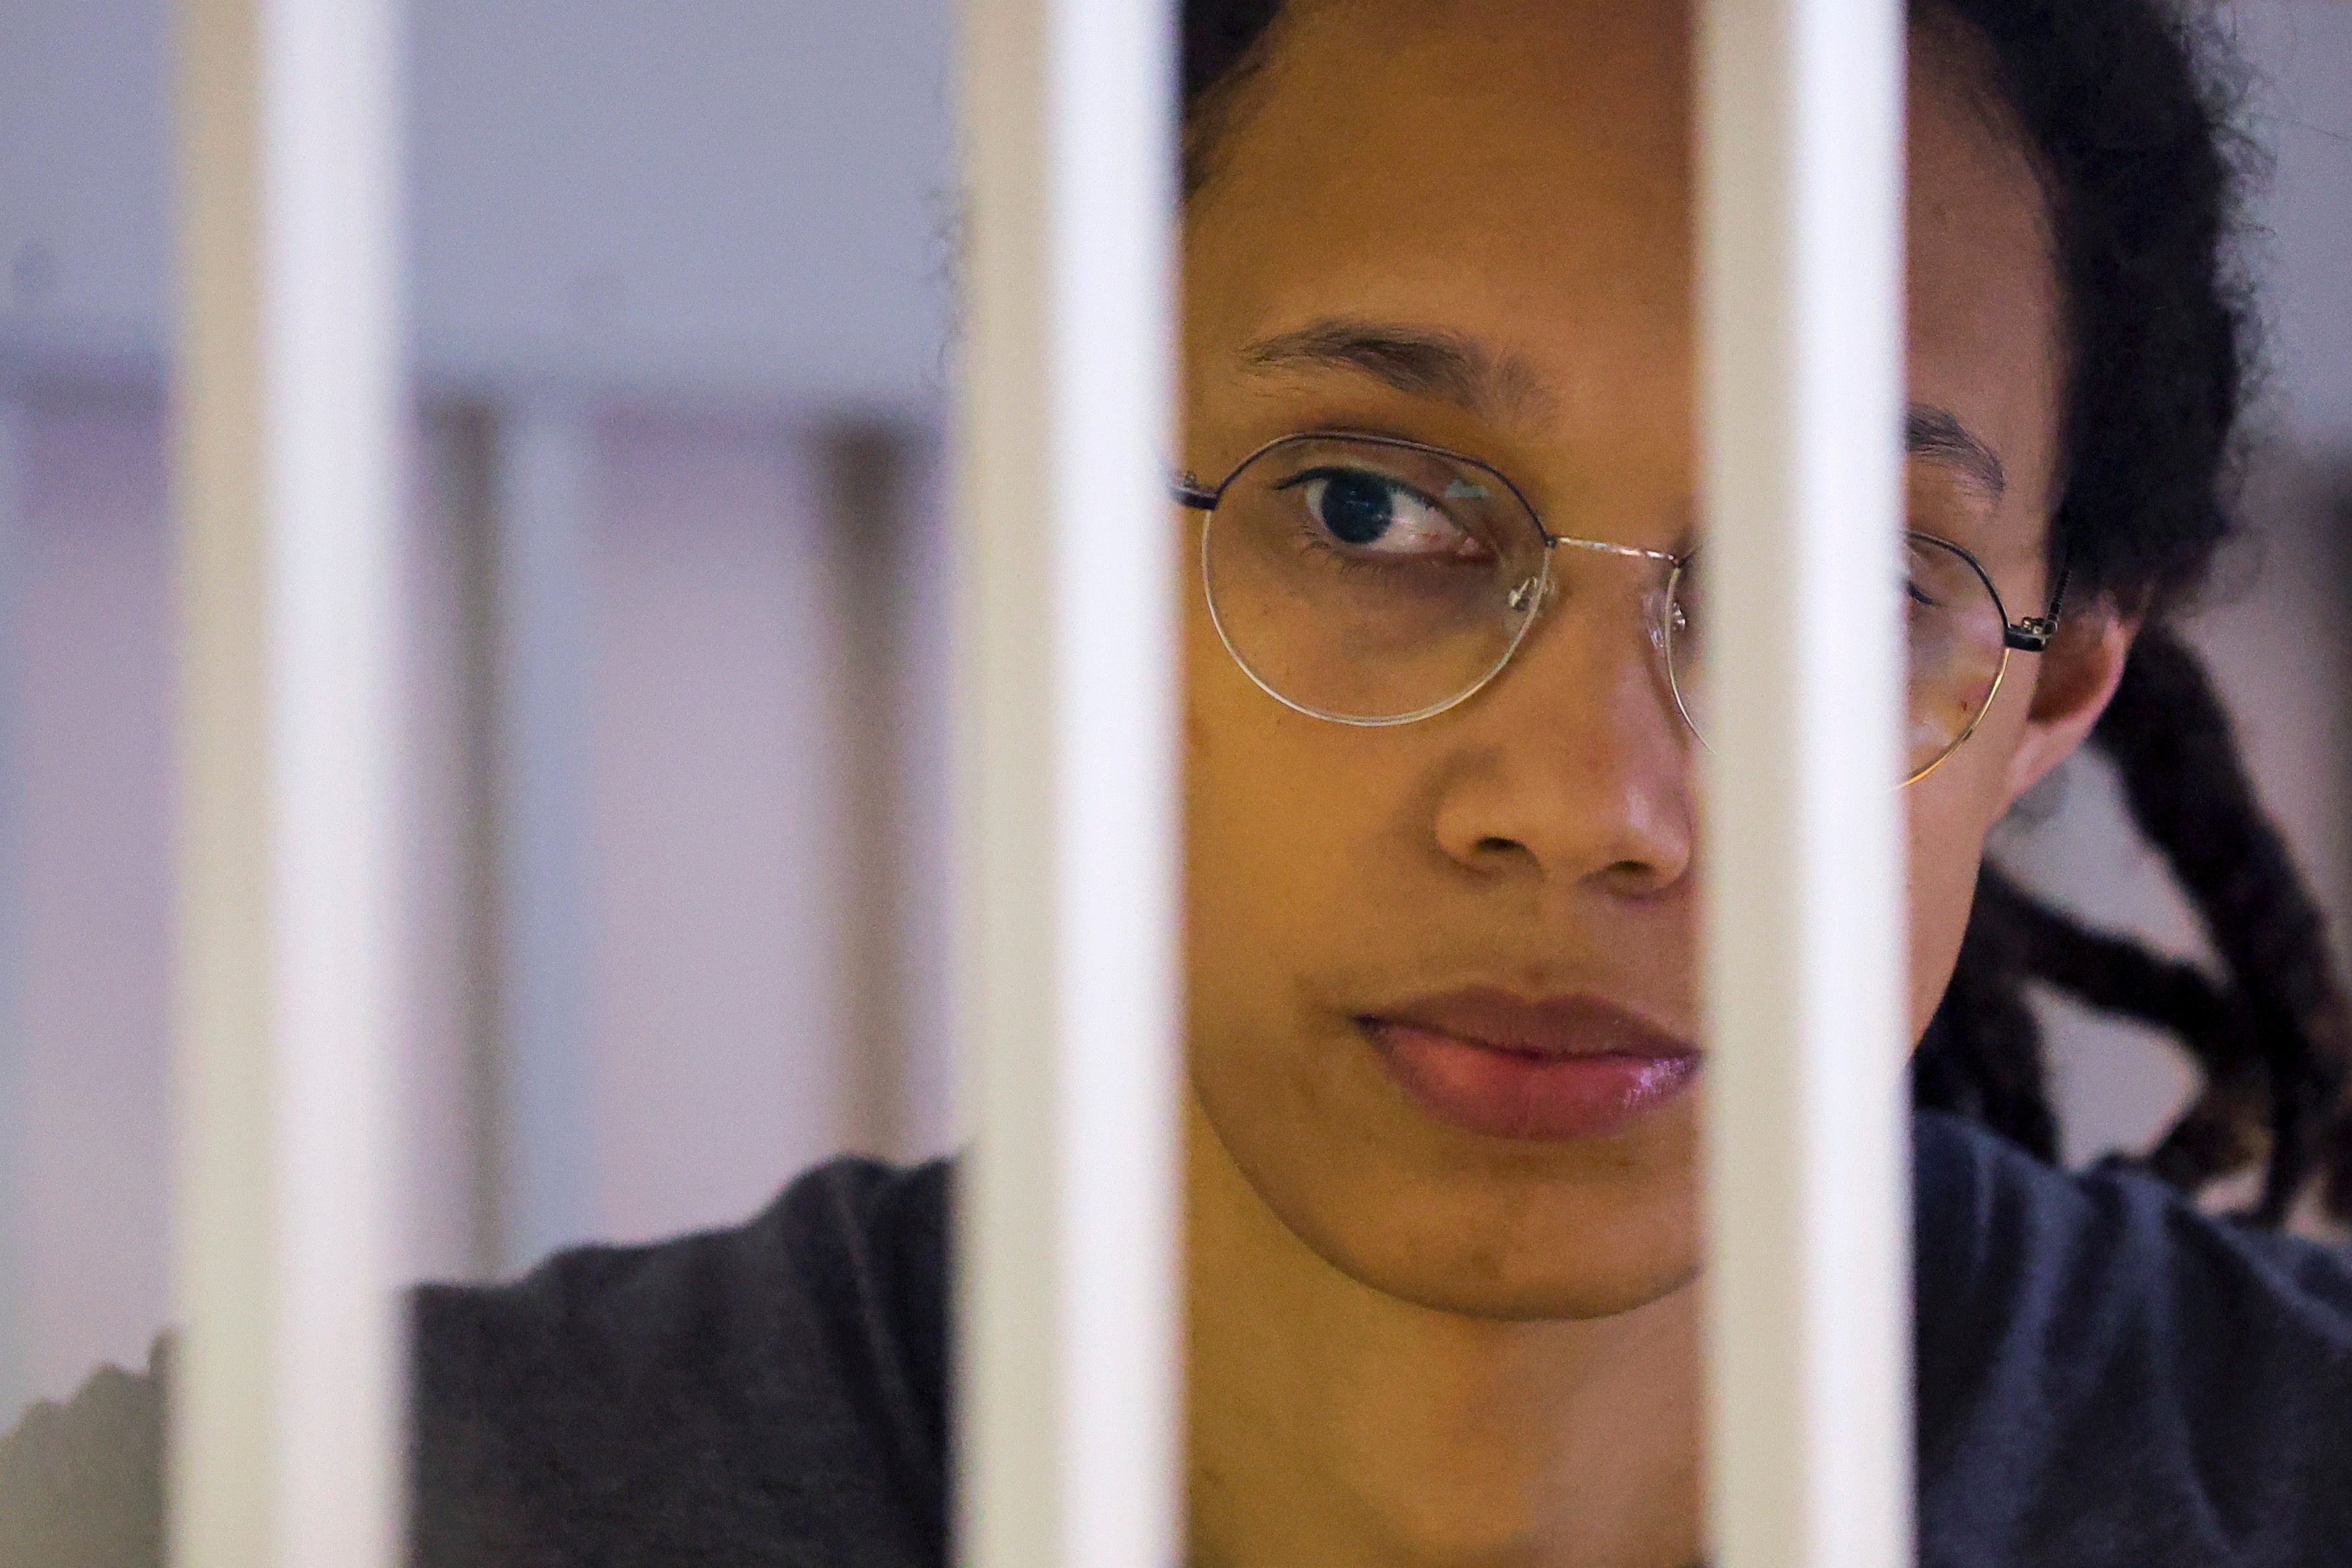 Brittney Griner has been imprisoned in Russia for months